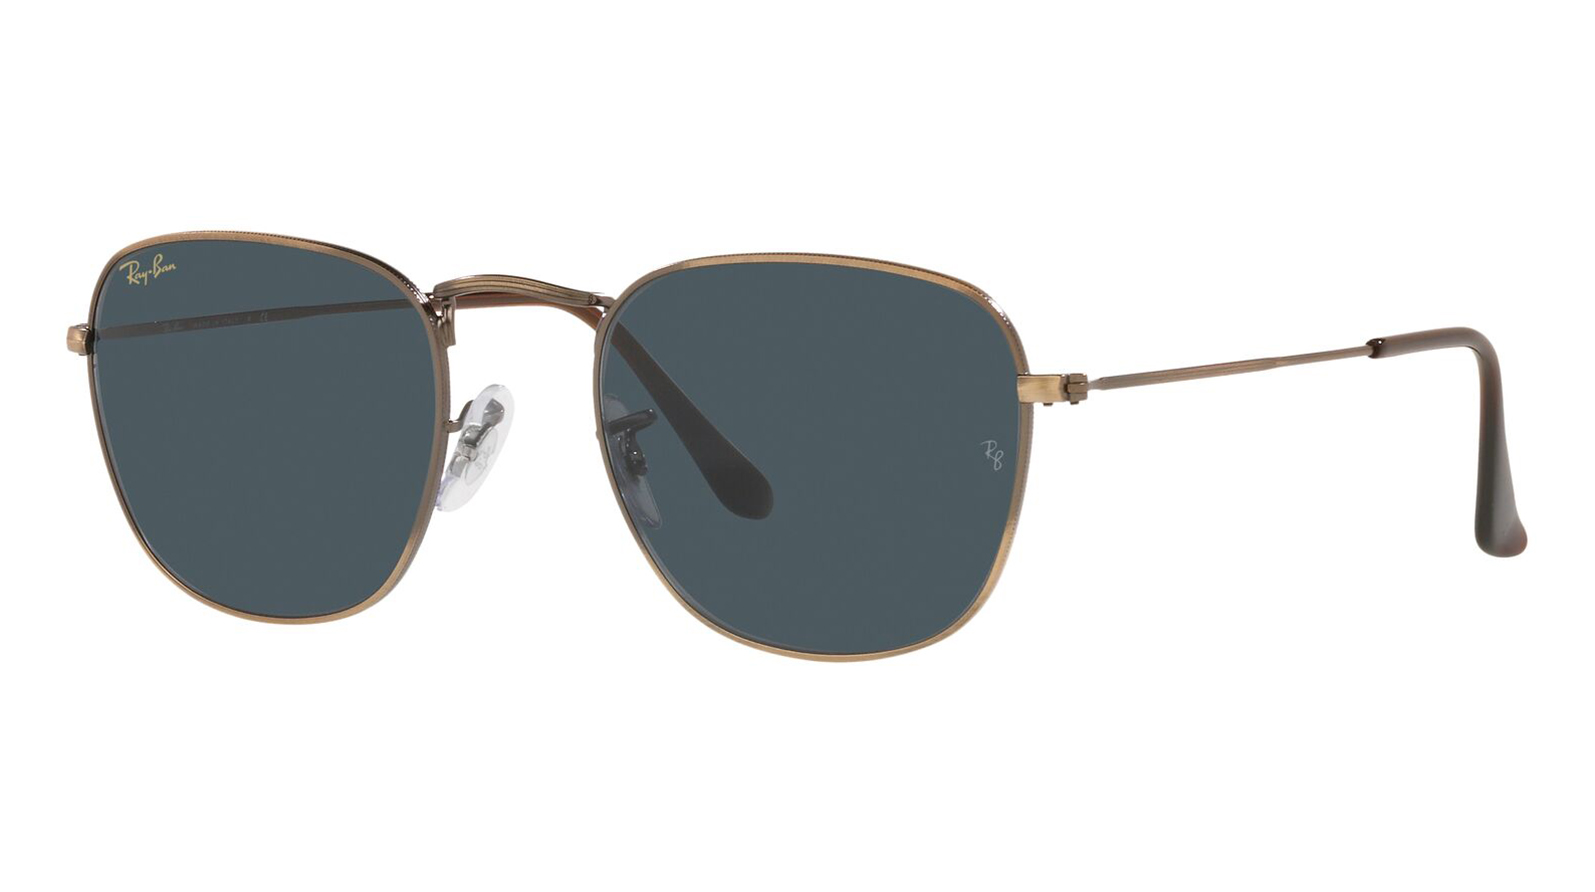 Ray-Ban Frank RB 3857 9230R5 ray ban frank rb 3857 9230r5